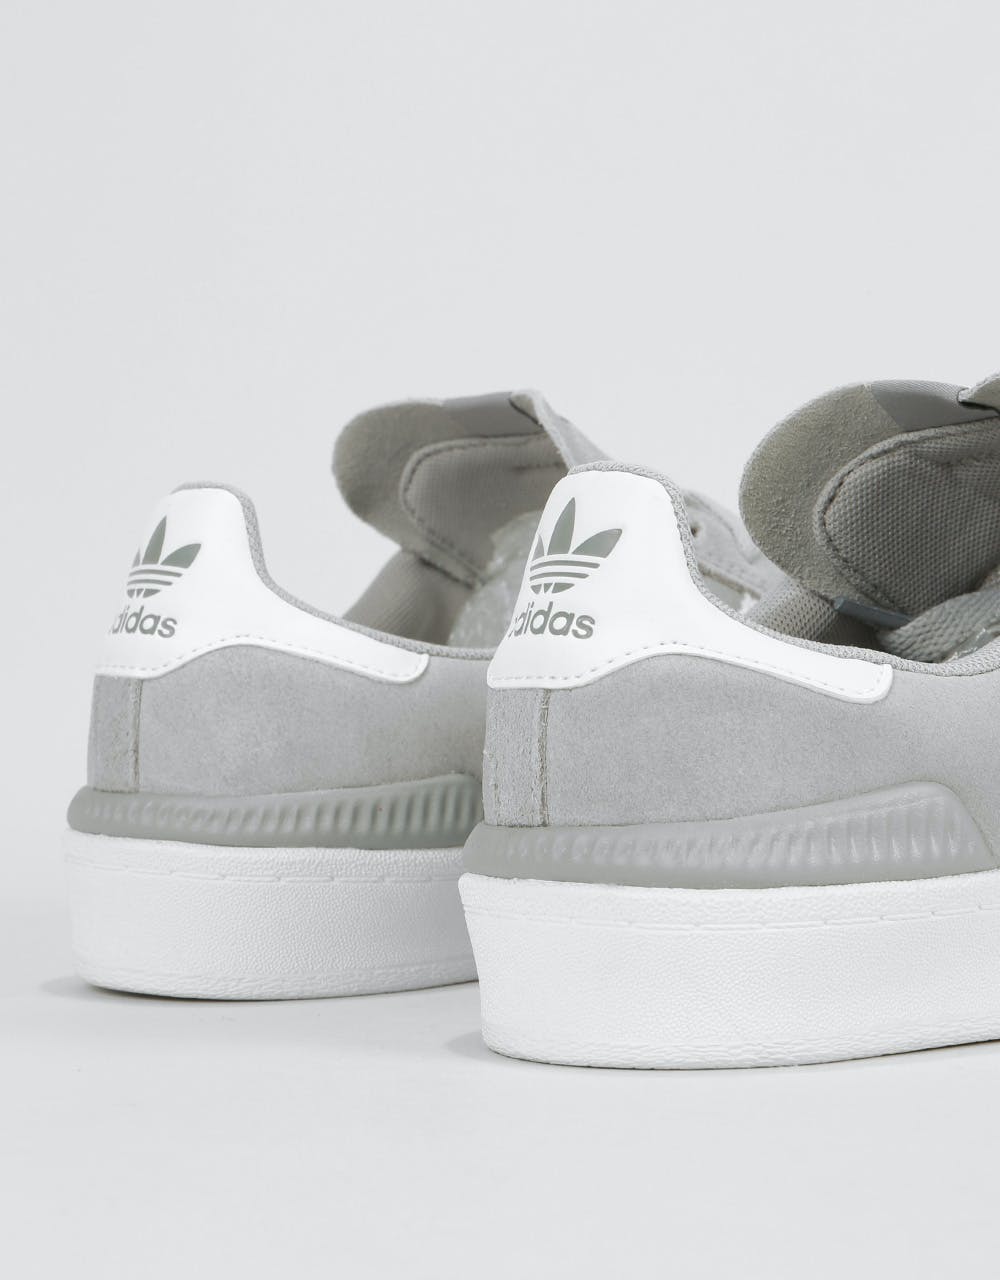 Adidas Campus ADV Skate Shoes - Solid Grey/White/White